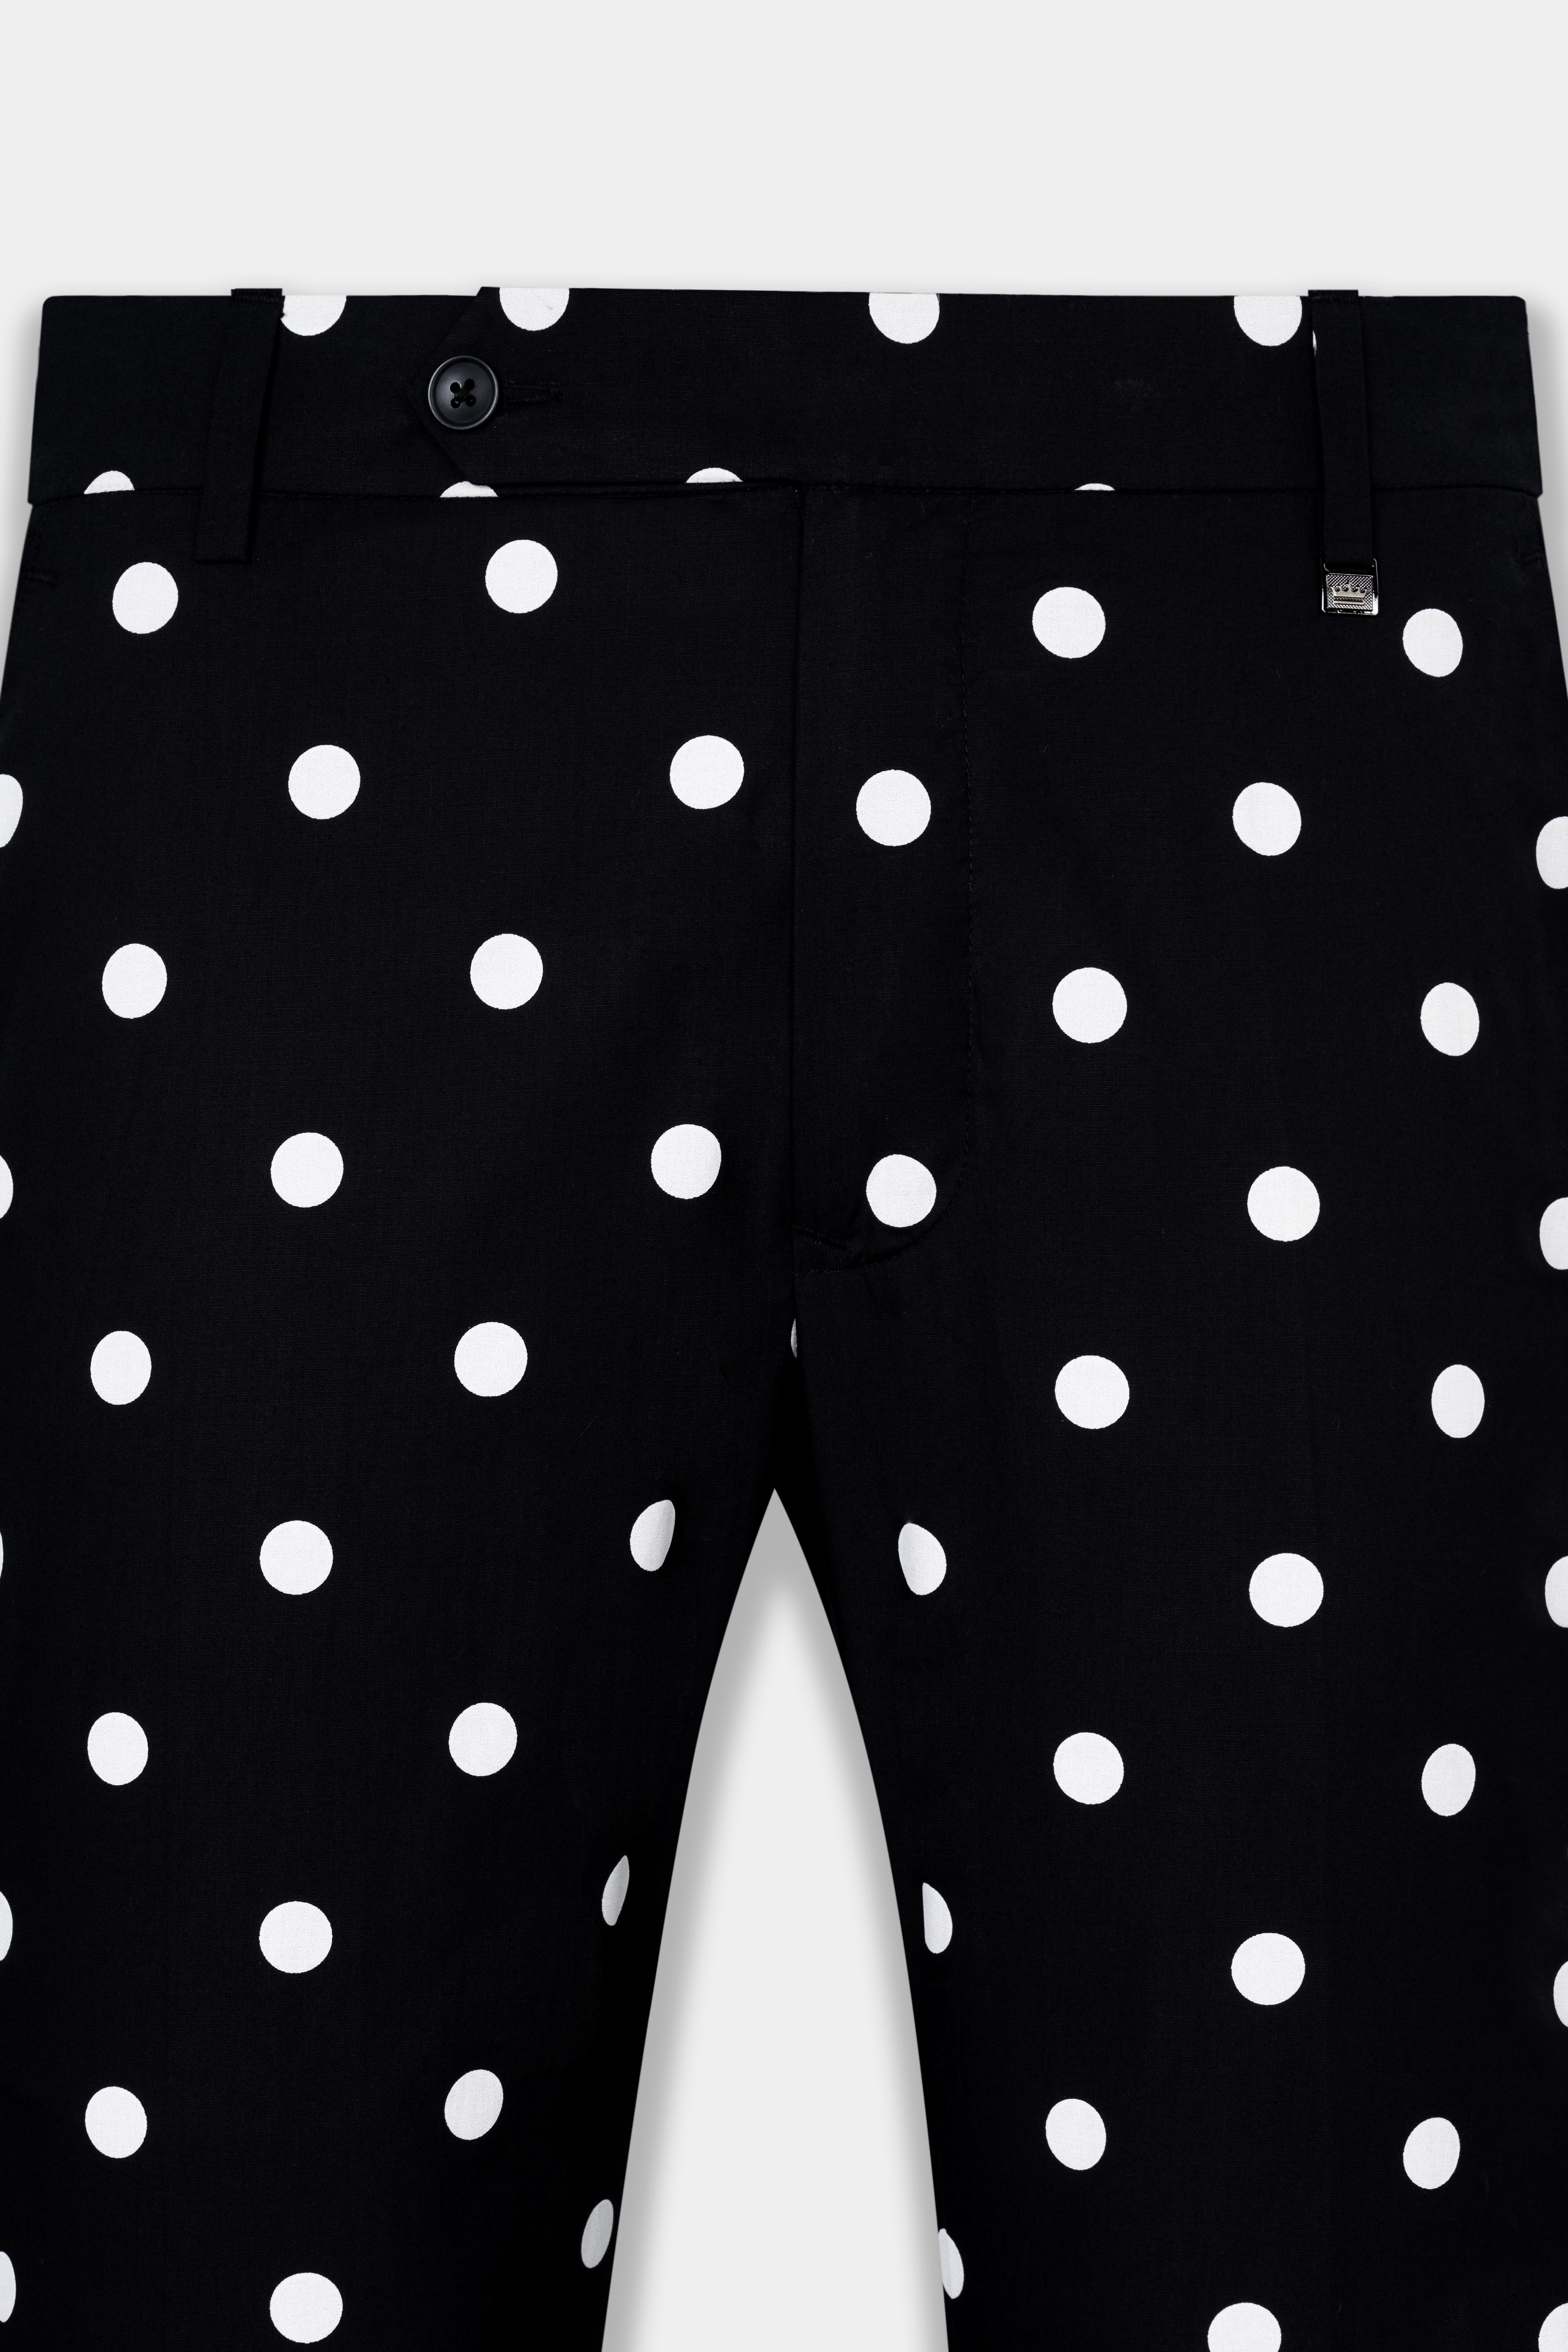 Black Trousers - Buy Black Trousers, Black Pants Online at Best Prices In  India